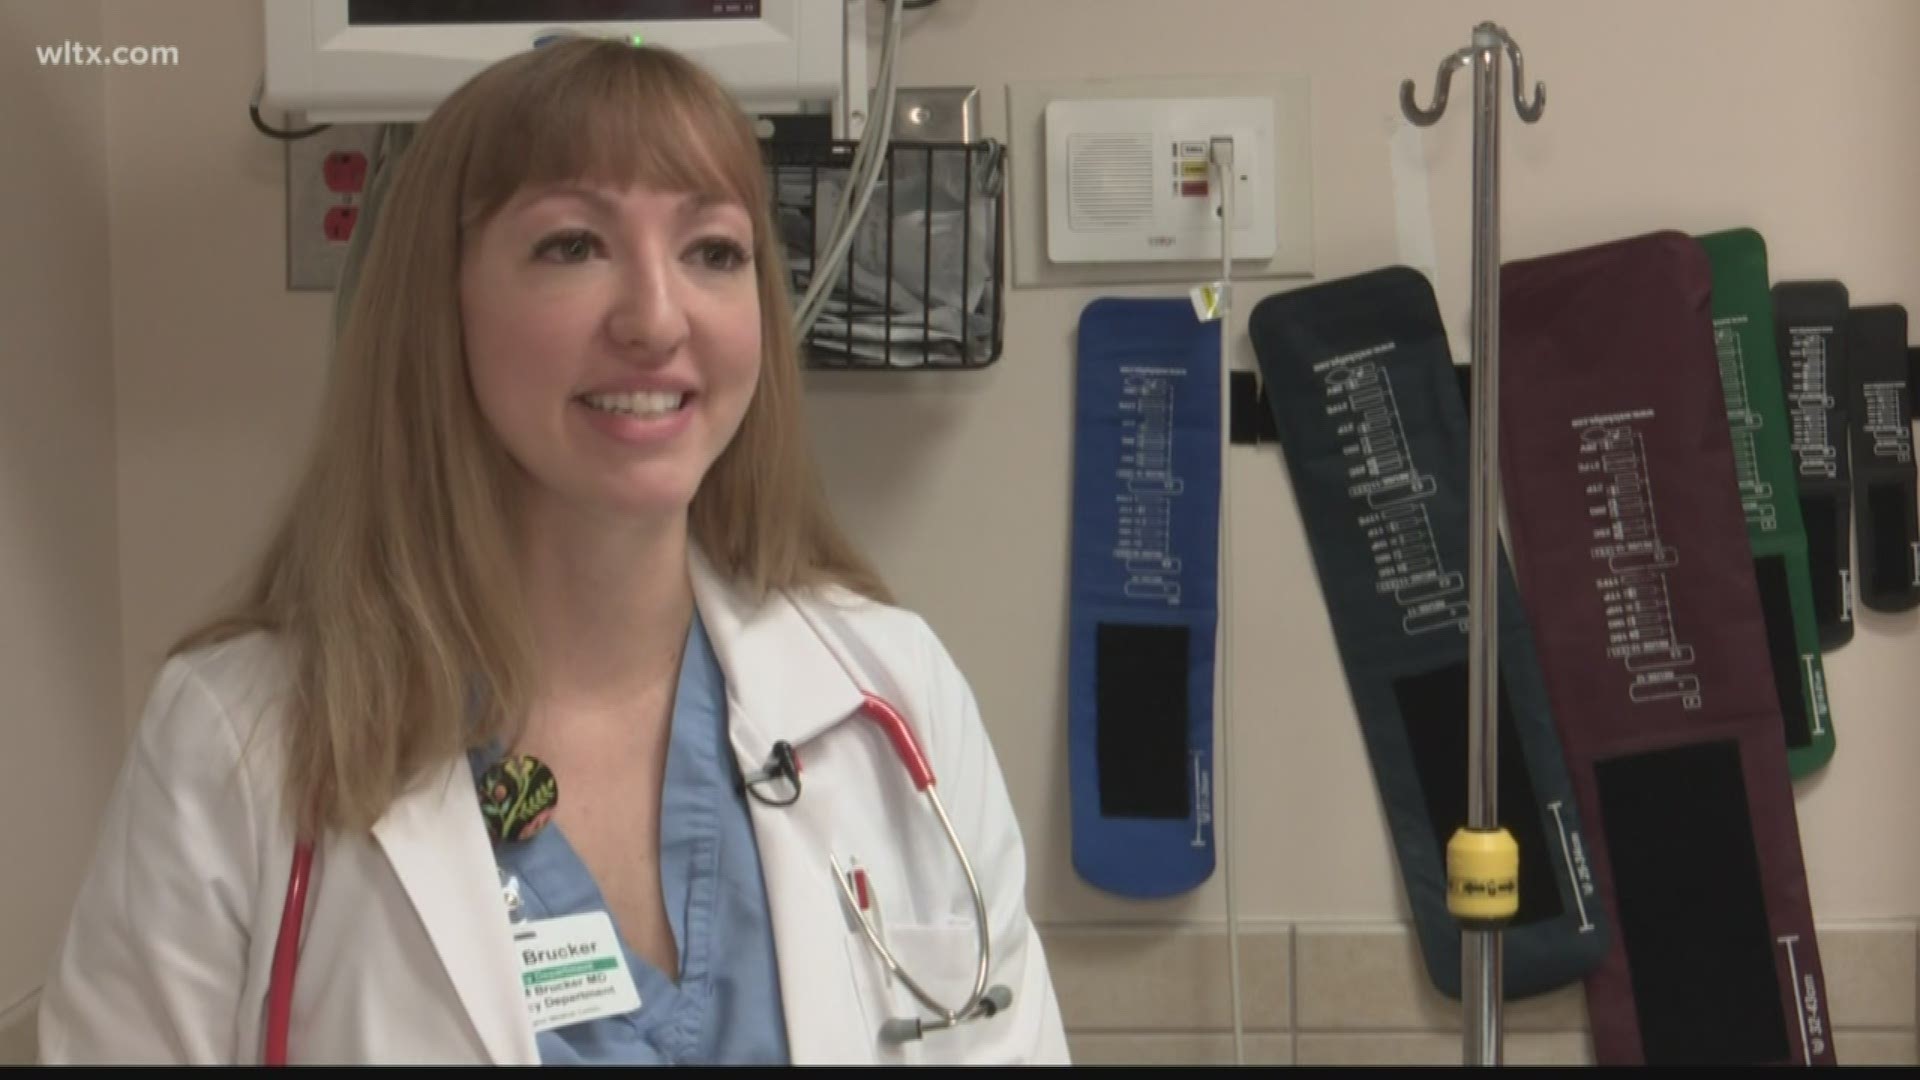 News 19’s Rosemarie Beltz spoke with a local emergency room doctor about how to avoid holiday injuries and what to do when you can’t.